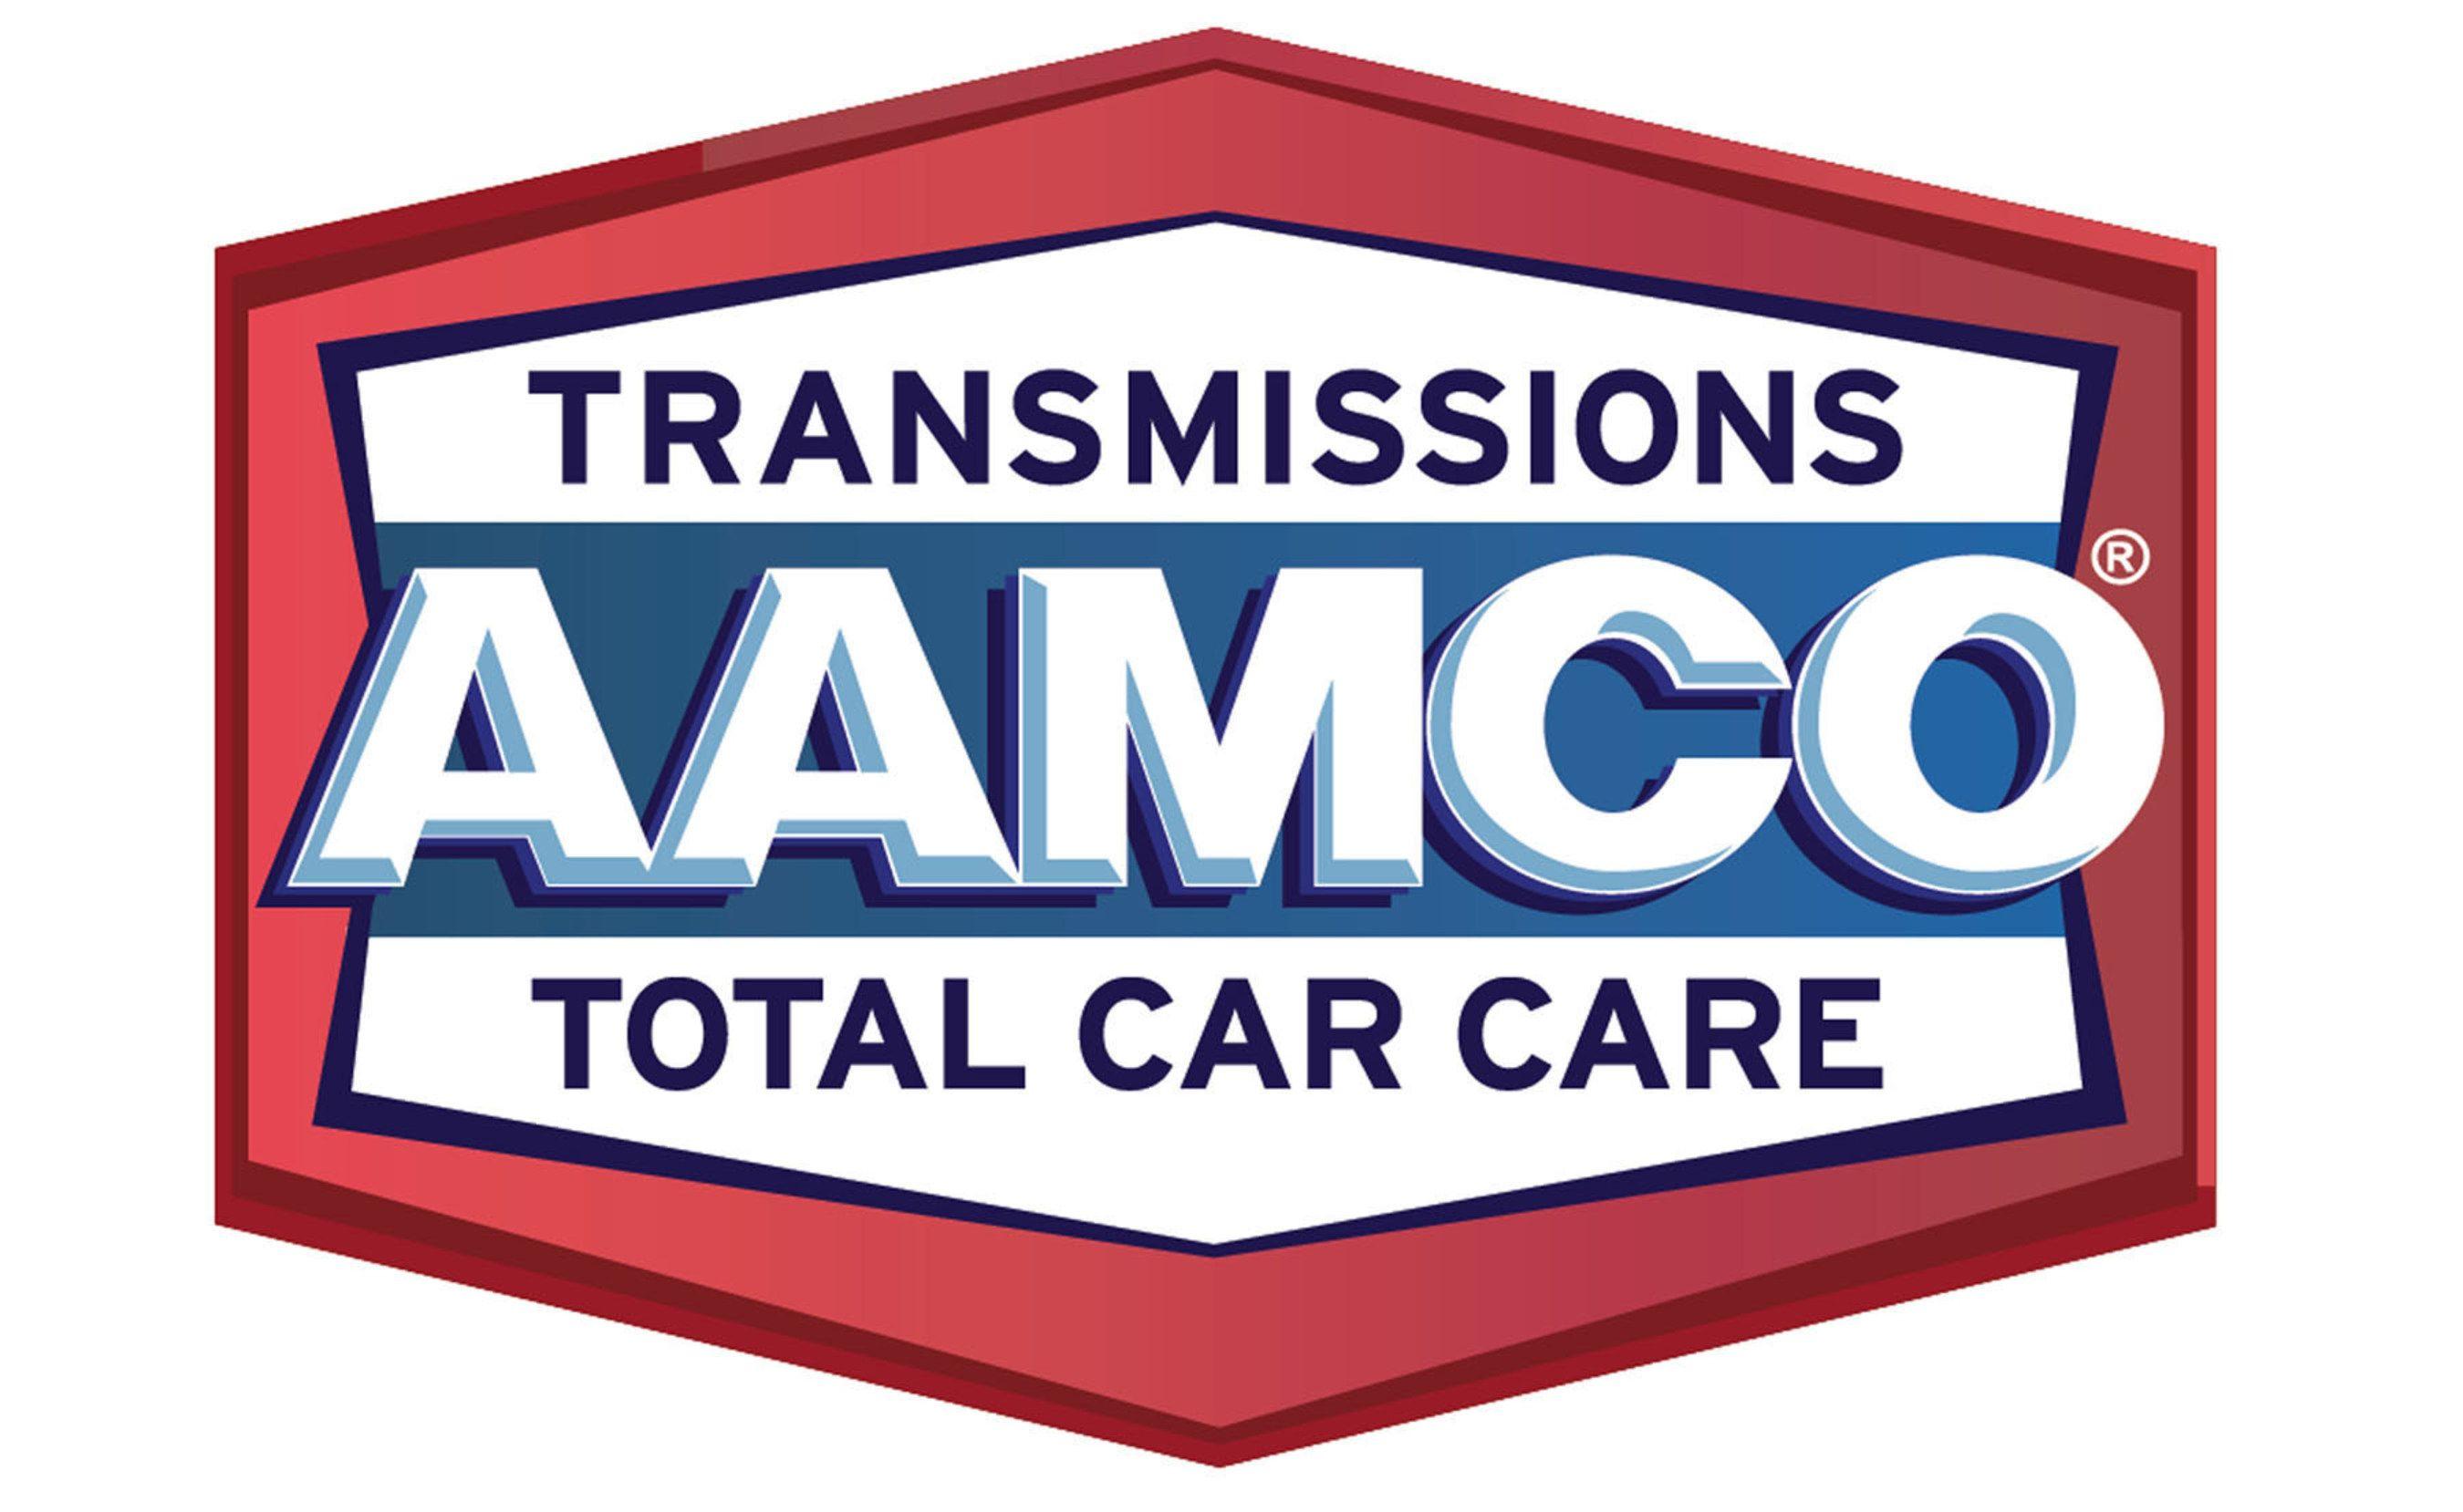 AAMCO Logo - AAMCO Franchise Of Waterford Owner Elected Vice President Of BNI Of